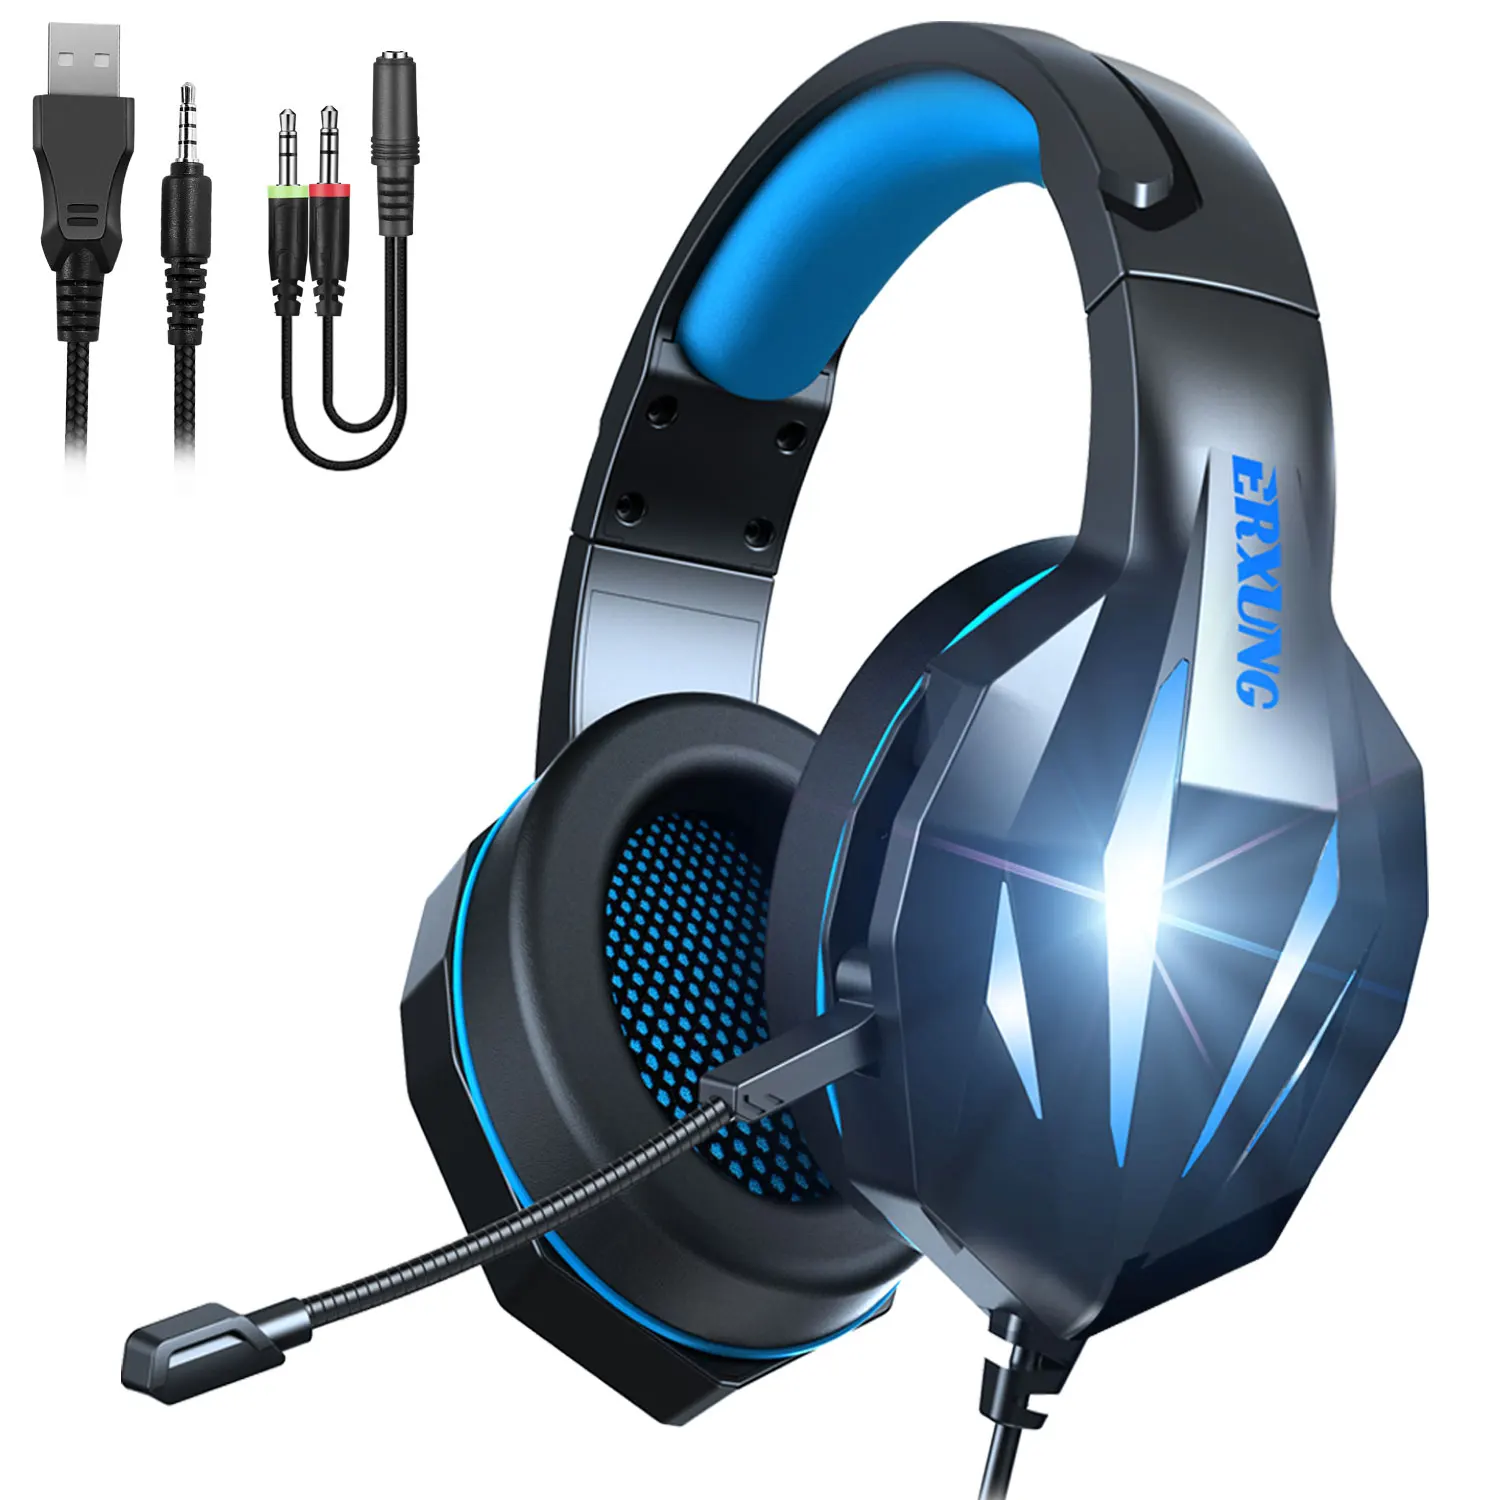 

Stereo Bass Gaming Headset For PC PS4 PS5 Xbox Over Ear Gamer Headphone with Mic Noise Canceling Computer Phone Gaming Helmet